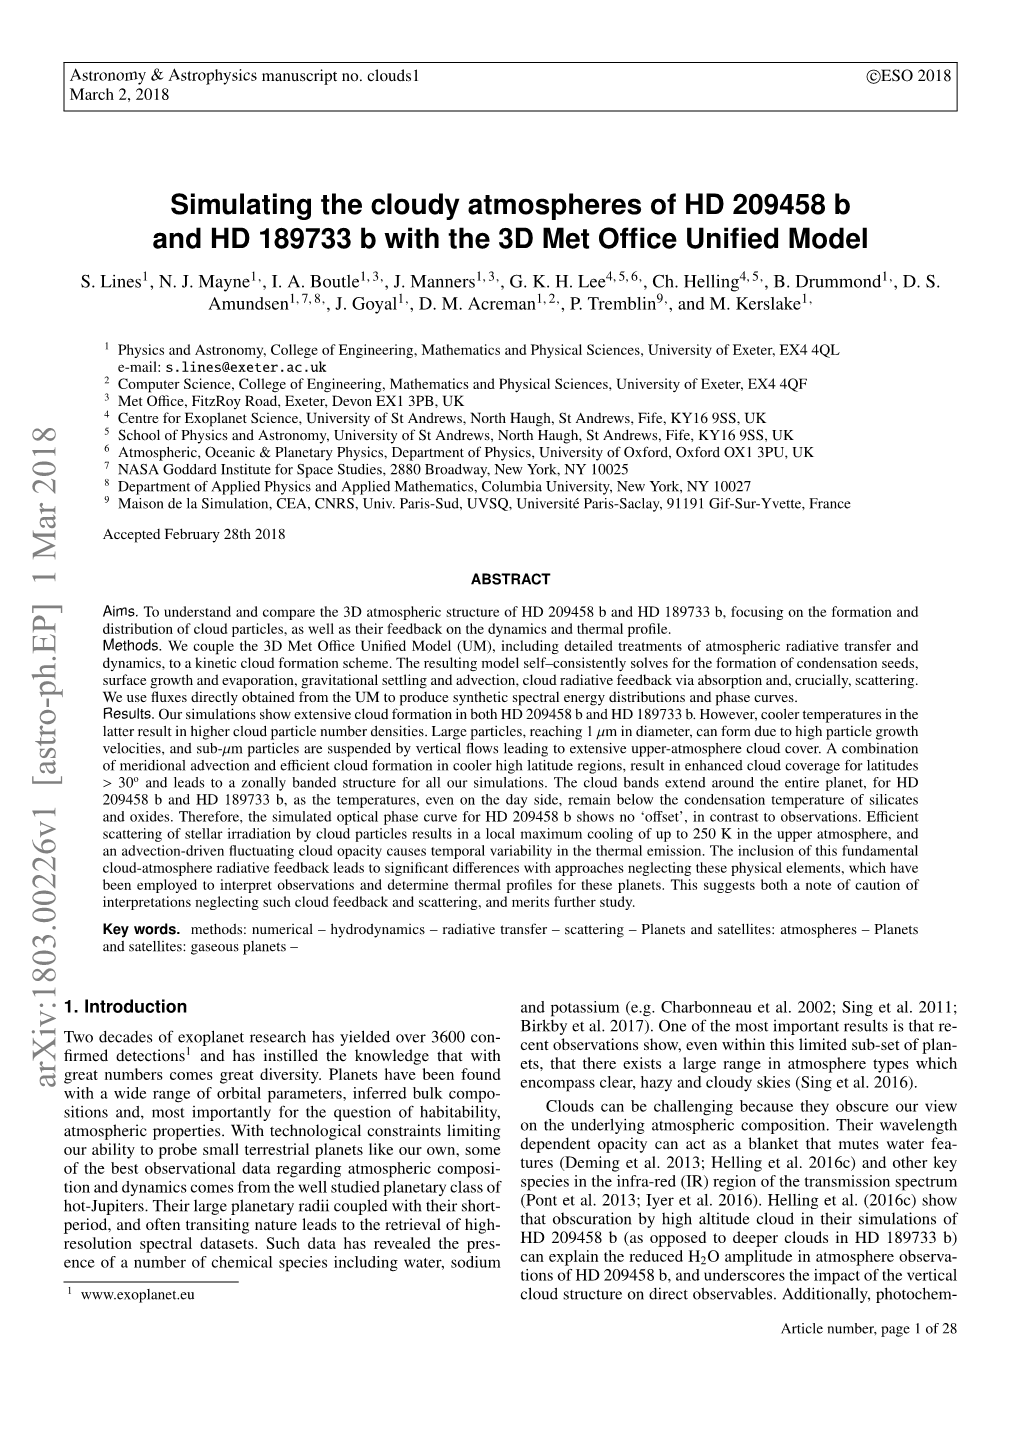 Simulating the Cloudy Atmospheres of HD 209458 B and HD 189733 B with the 3D Met Office Unified Model